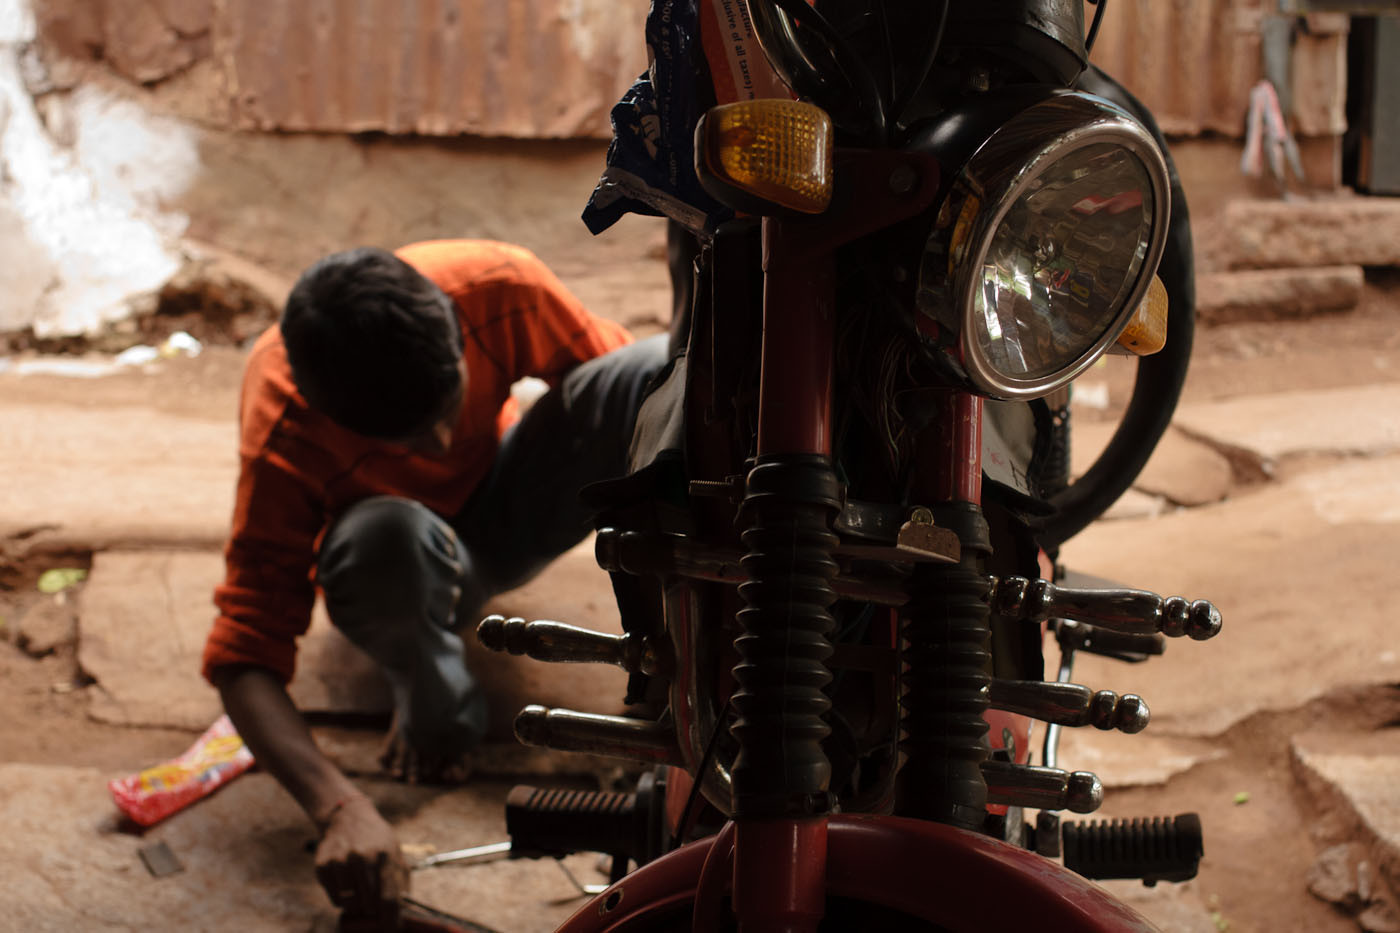 Indian boy fixing a flat tire on a scooter in a bike shop in Hospet, India